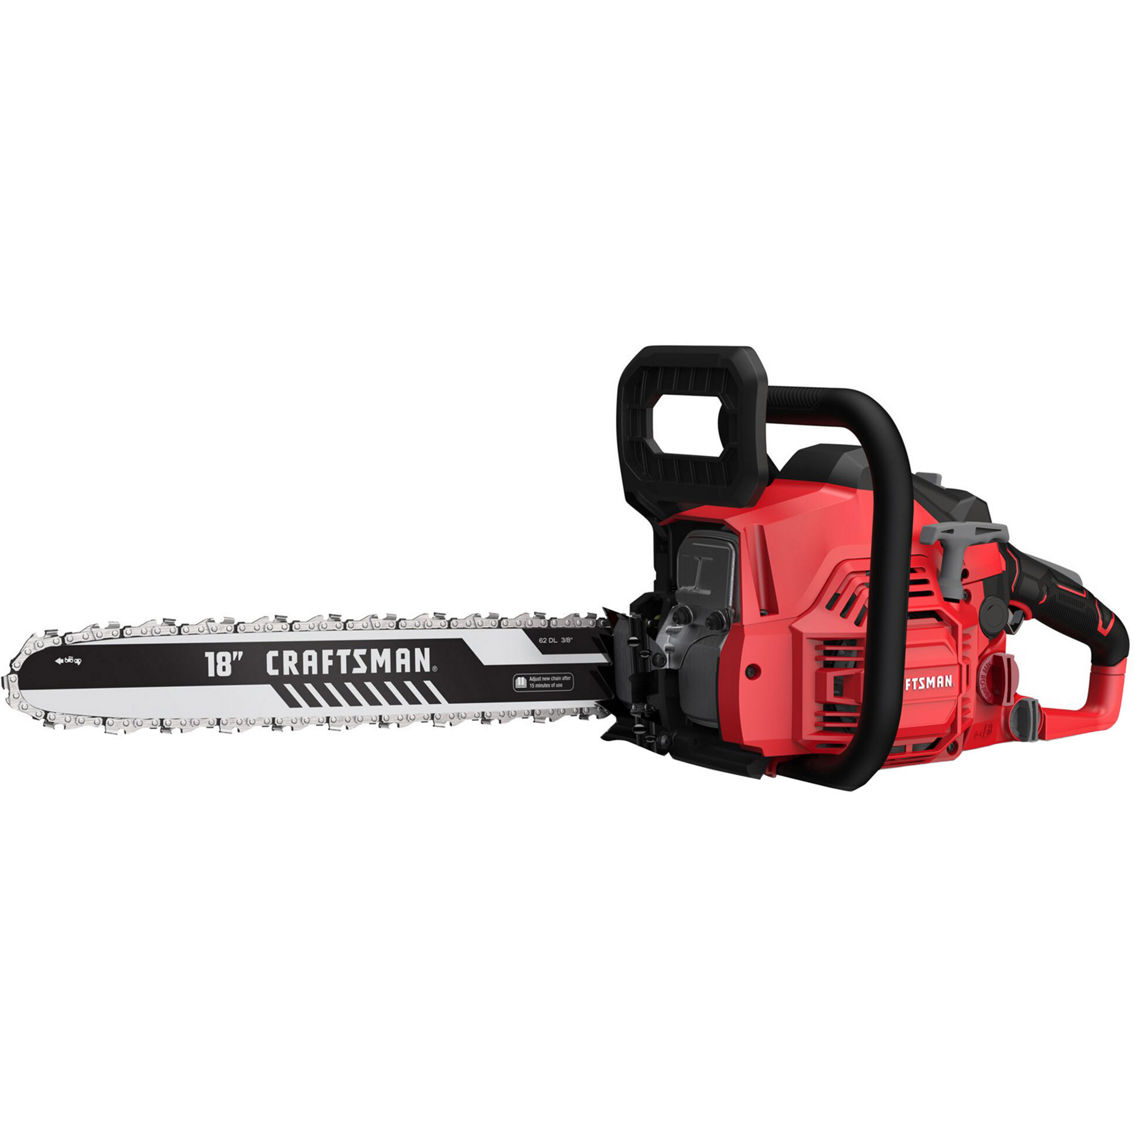 Craftsman 20-in. 46cc 2 Cycle Gas Chainsaw - Image 2 of 6